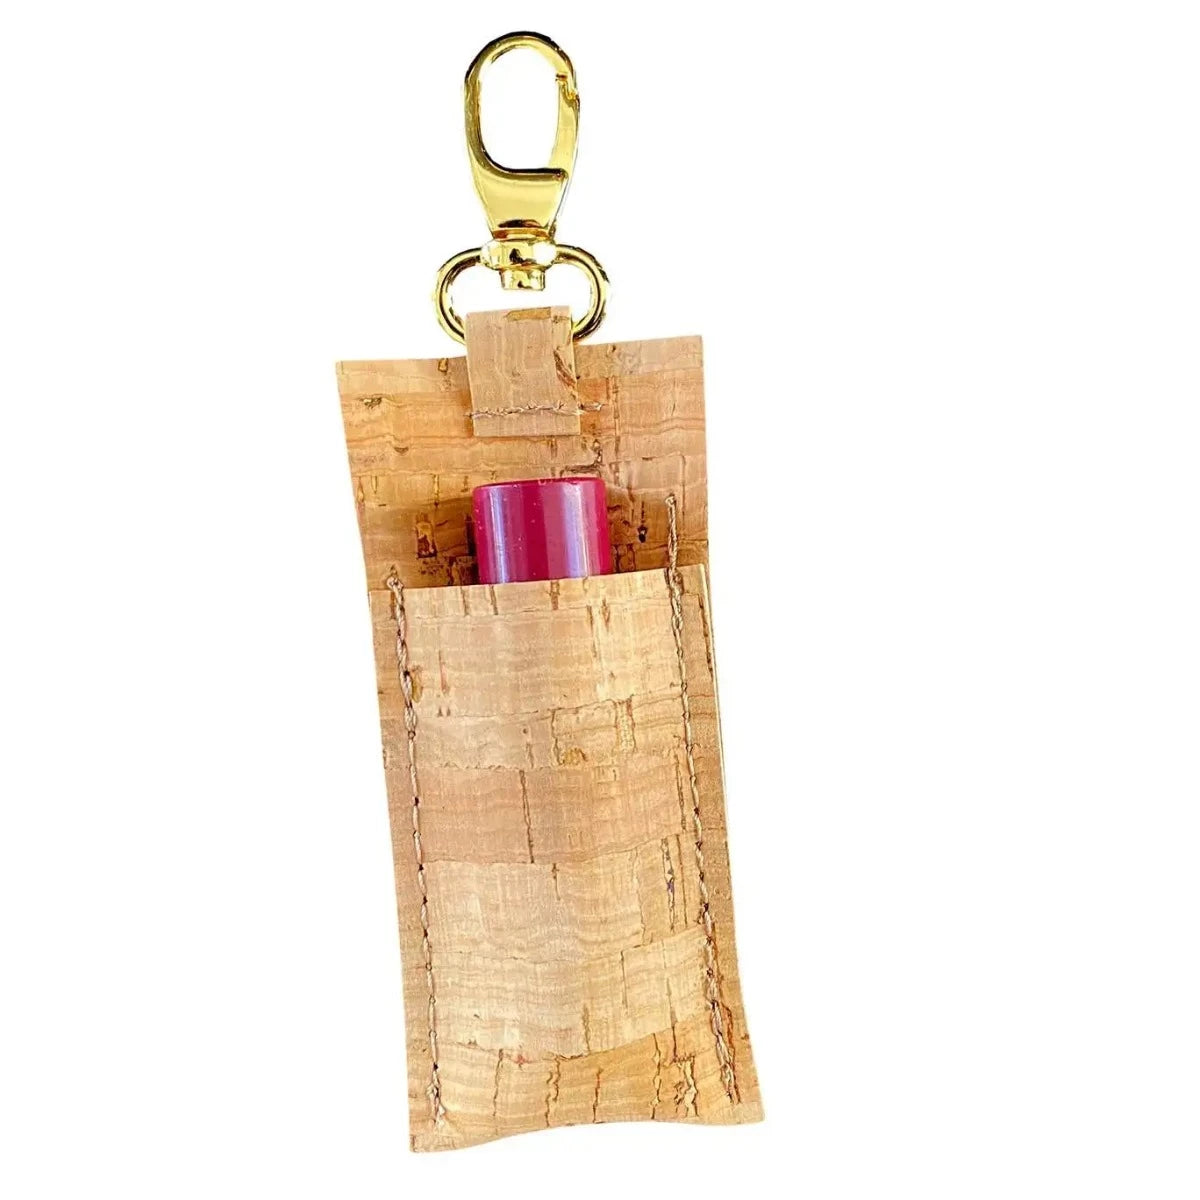 Lip Balm Holder made of Tan Cork Material with a Gold Color Keyring